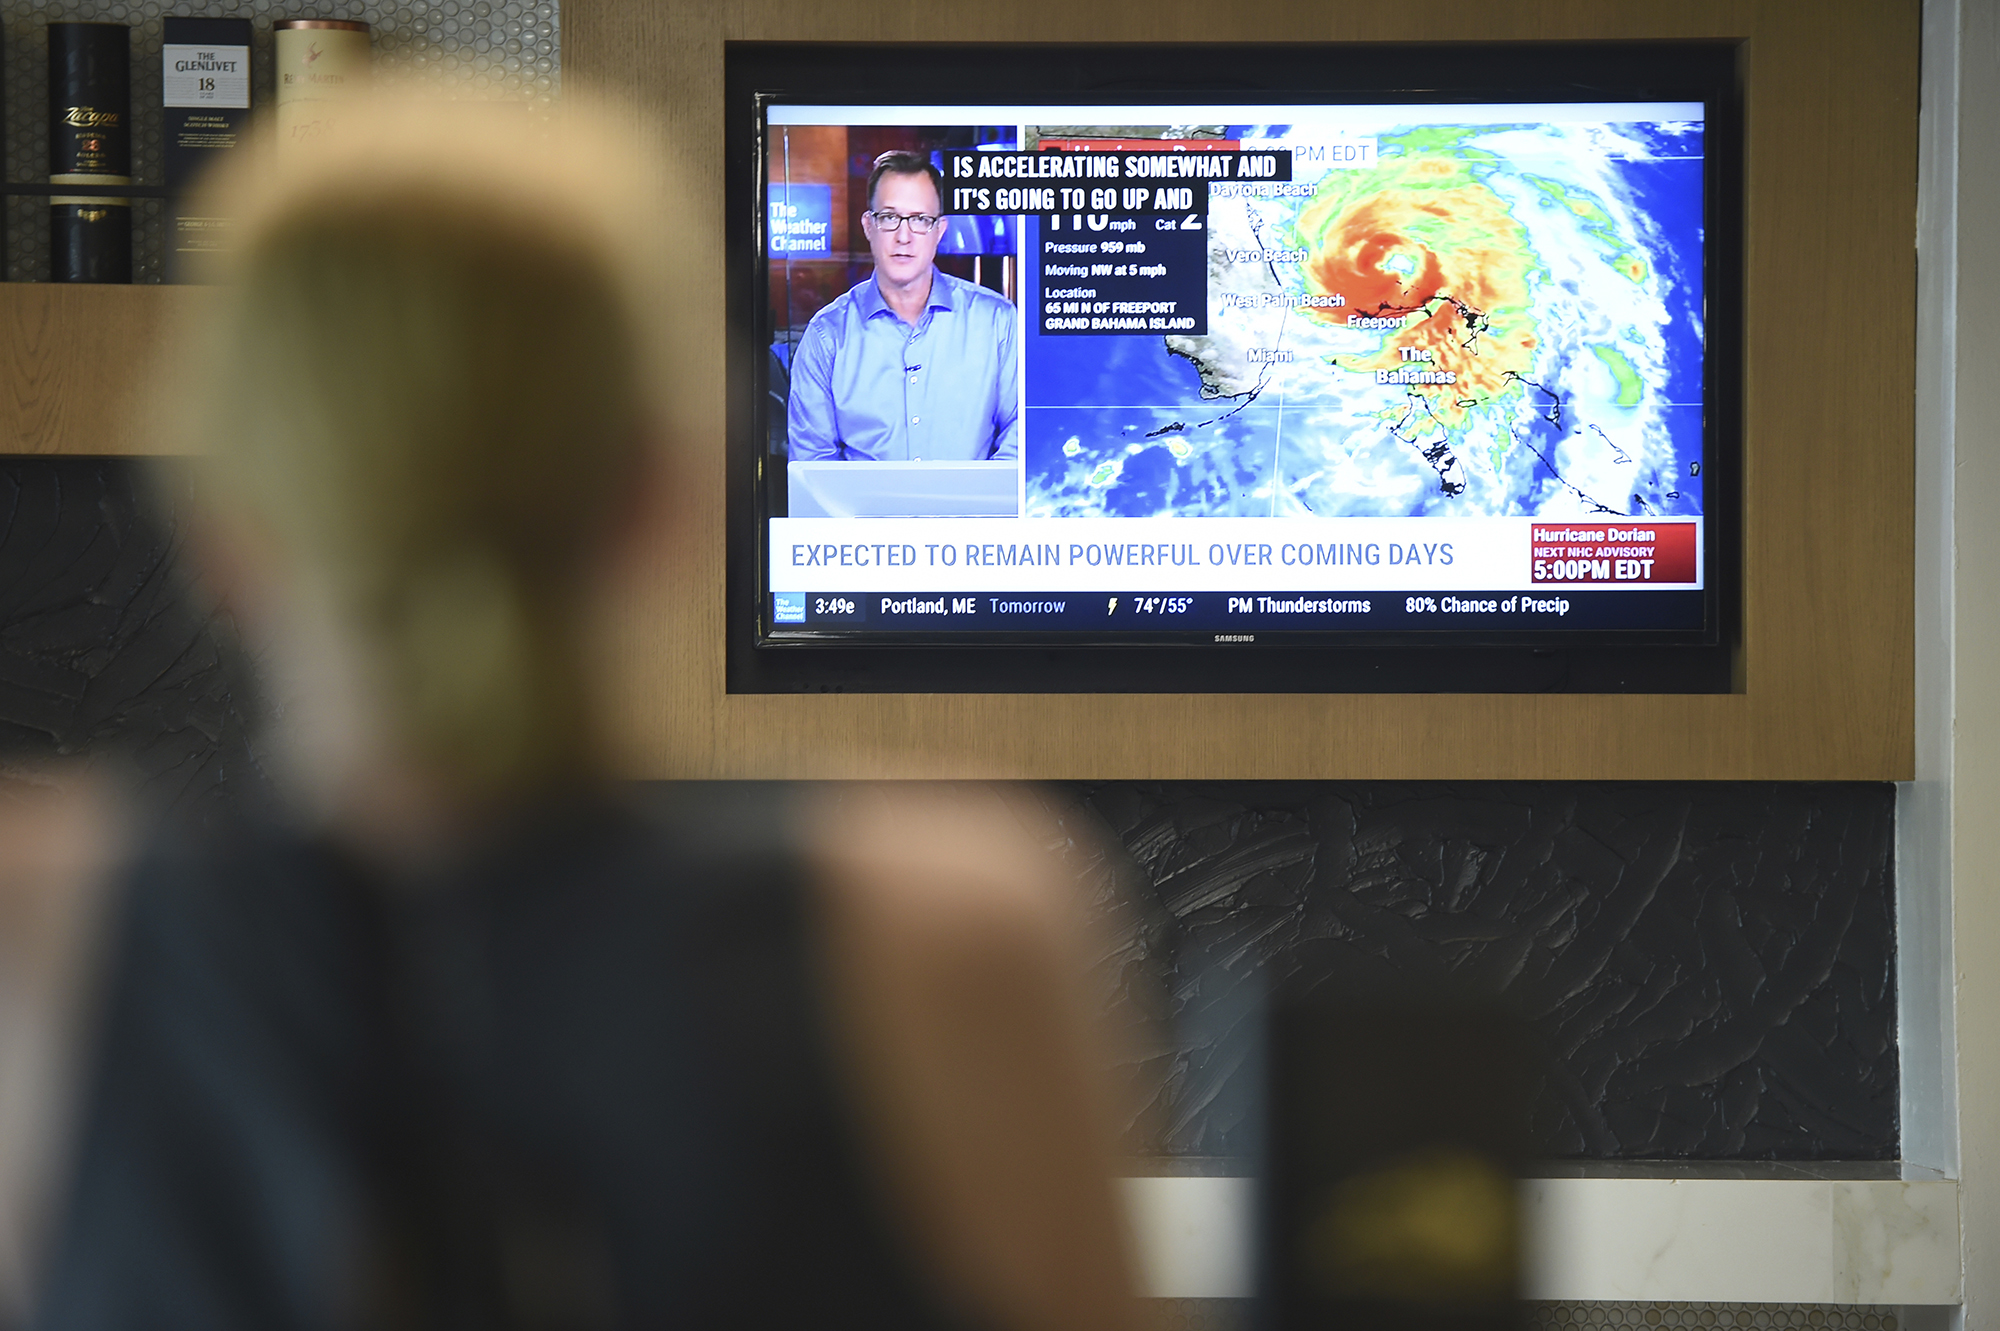 Media consumption linked to belief in climate change consistent with science